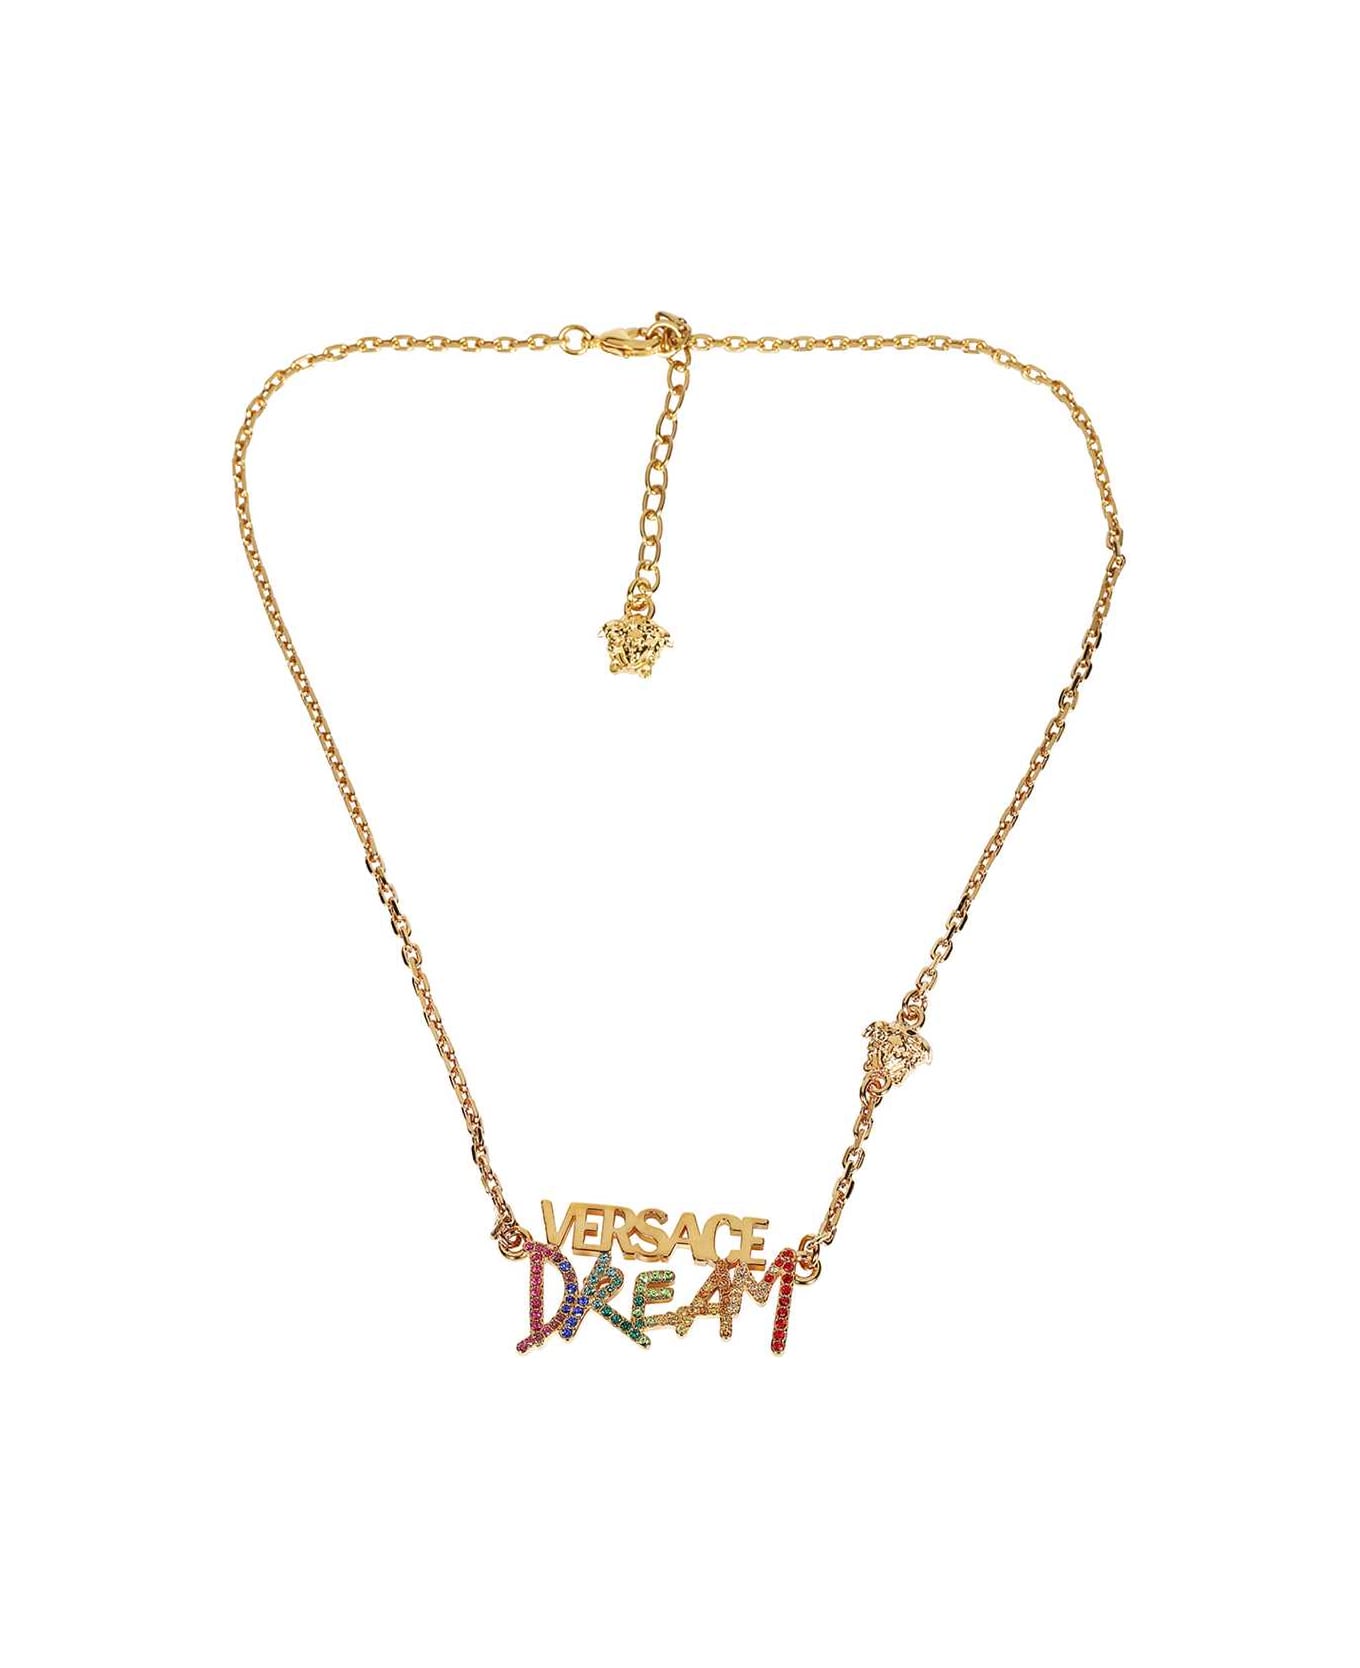 Versace Gold-tone Metal Necklace - Gold ネックレス